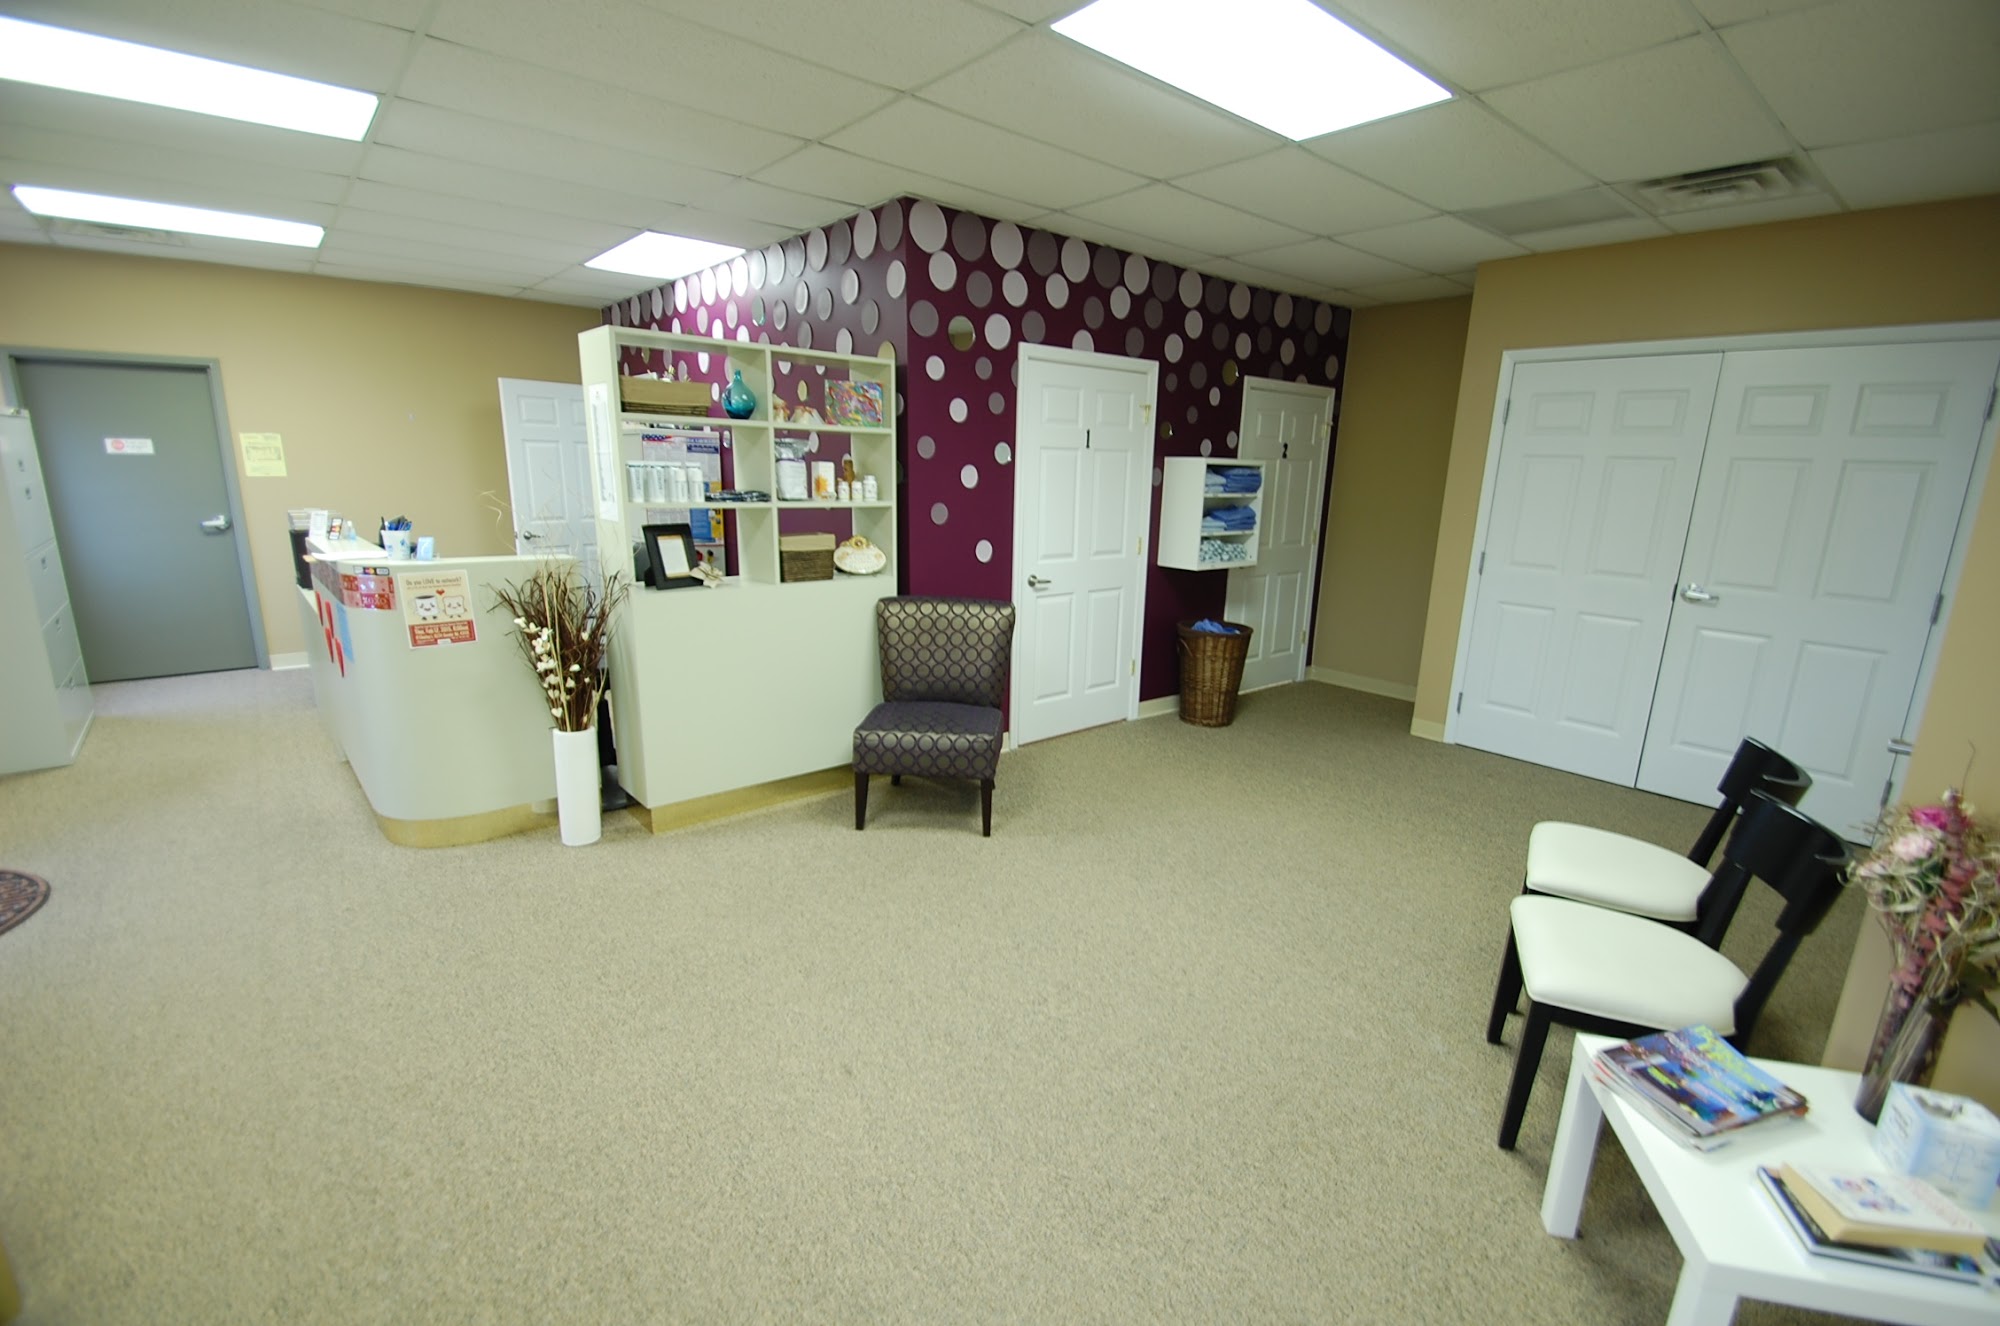 Lawson Family Chiropractic Center